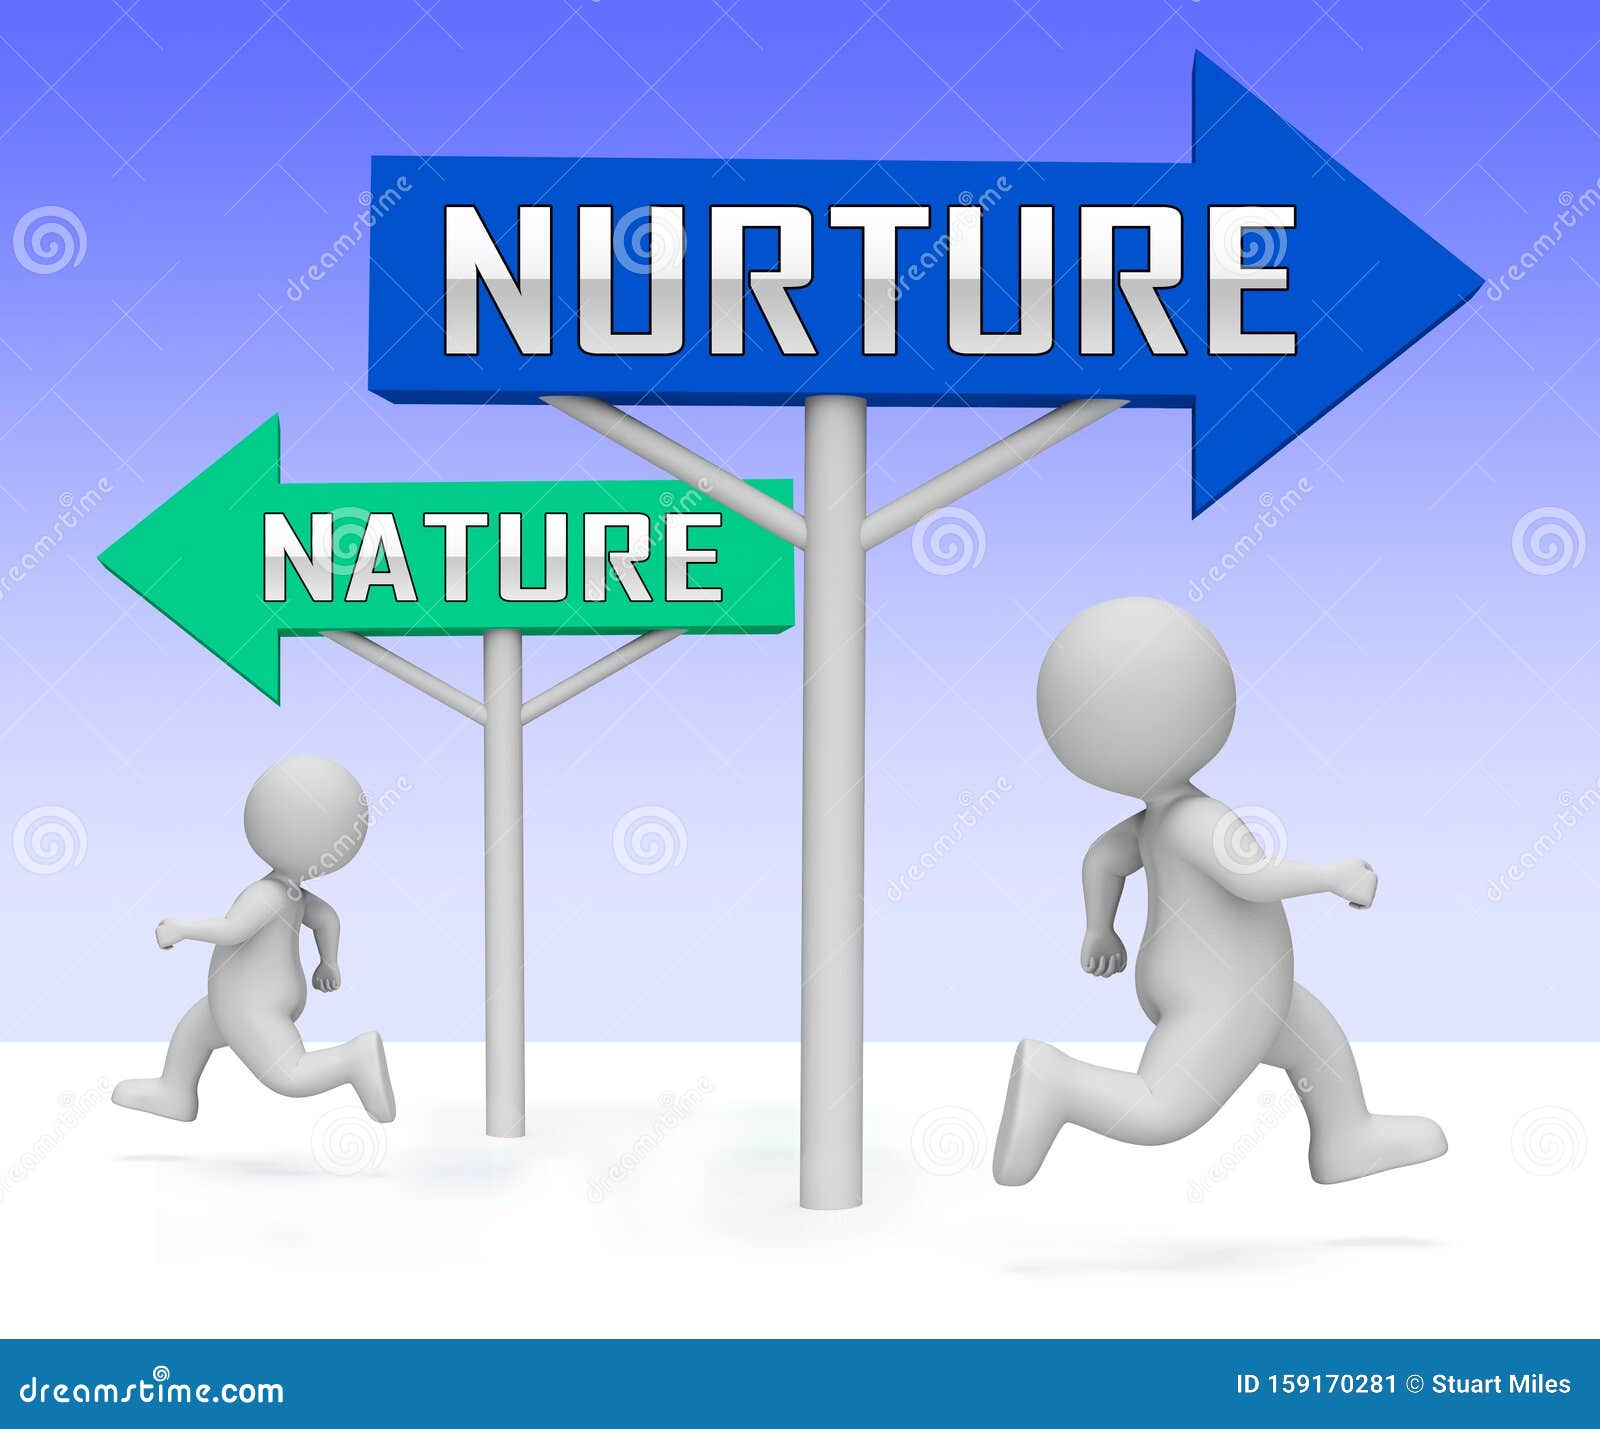 Nature Vs Nurture Sign Means Theory of Natural Intelligence Against - 3d Stock Illustration - Illustration of freud, teens: 159170281